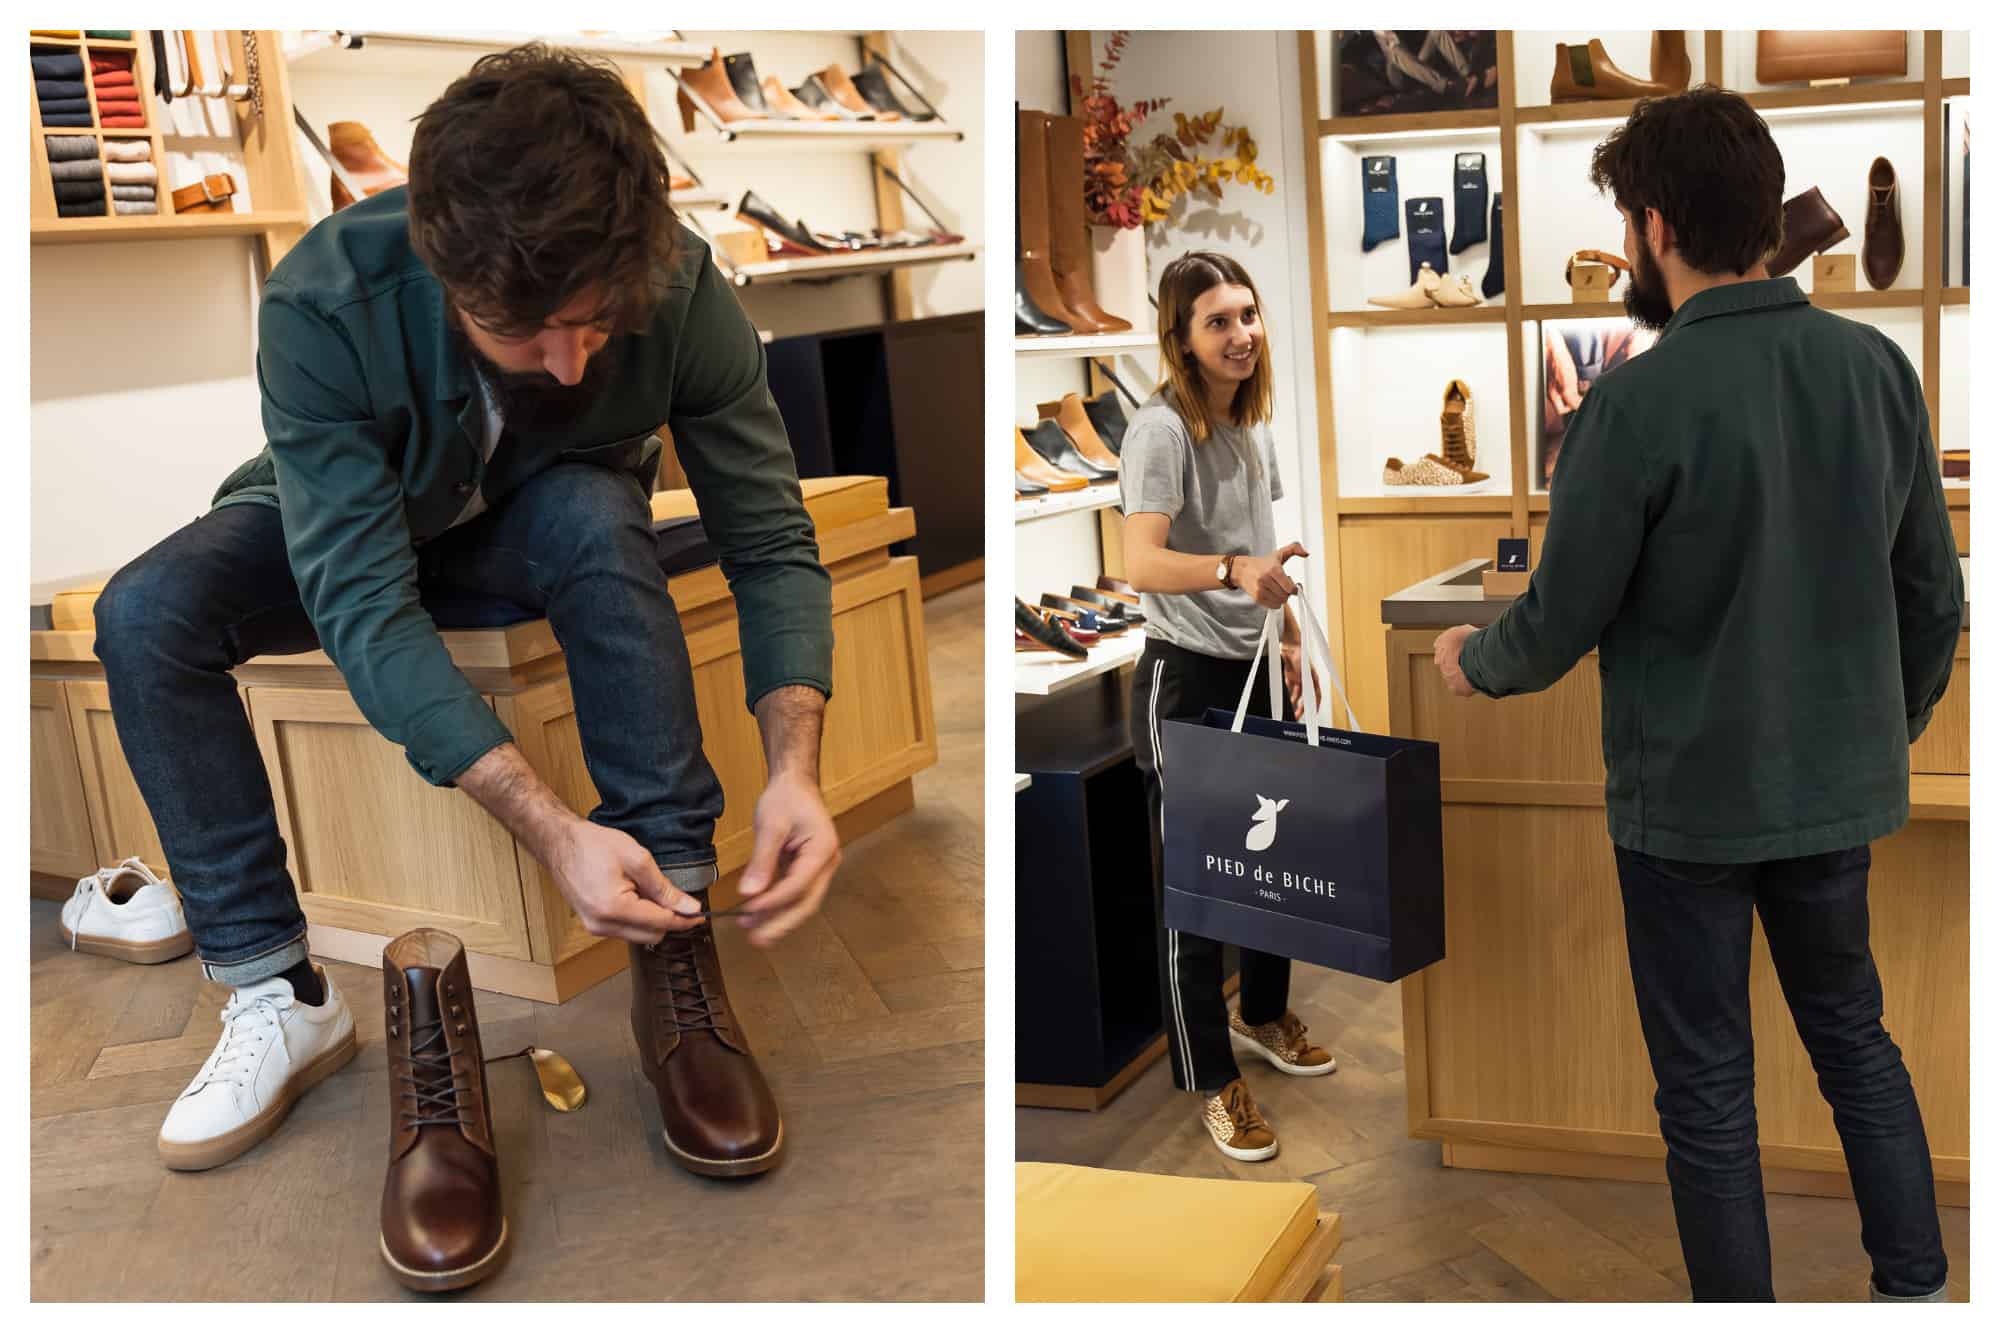 A man wearing an open green shirt trying on beautiful brown leather boots at Pied de Biche in Paris (left). Shop assistant hands customer a pair of shoes in a bag at Pied de Biche (right).